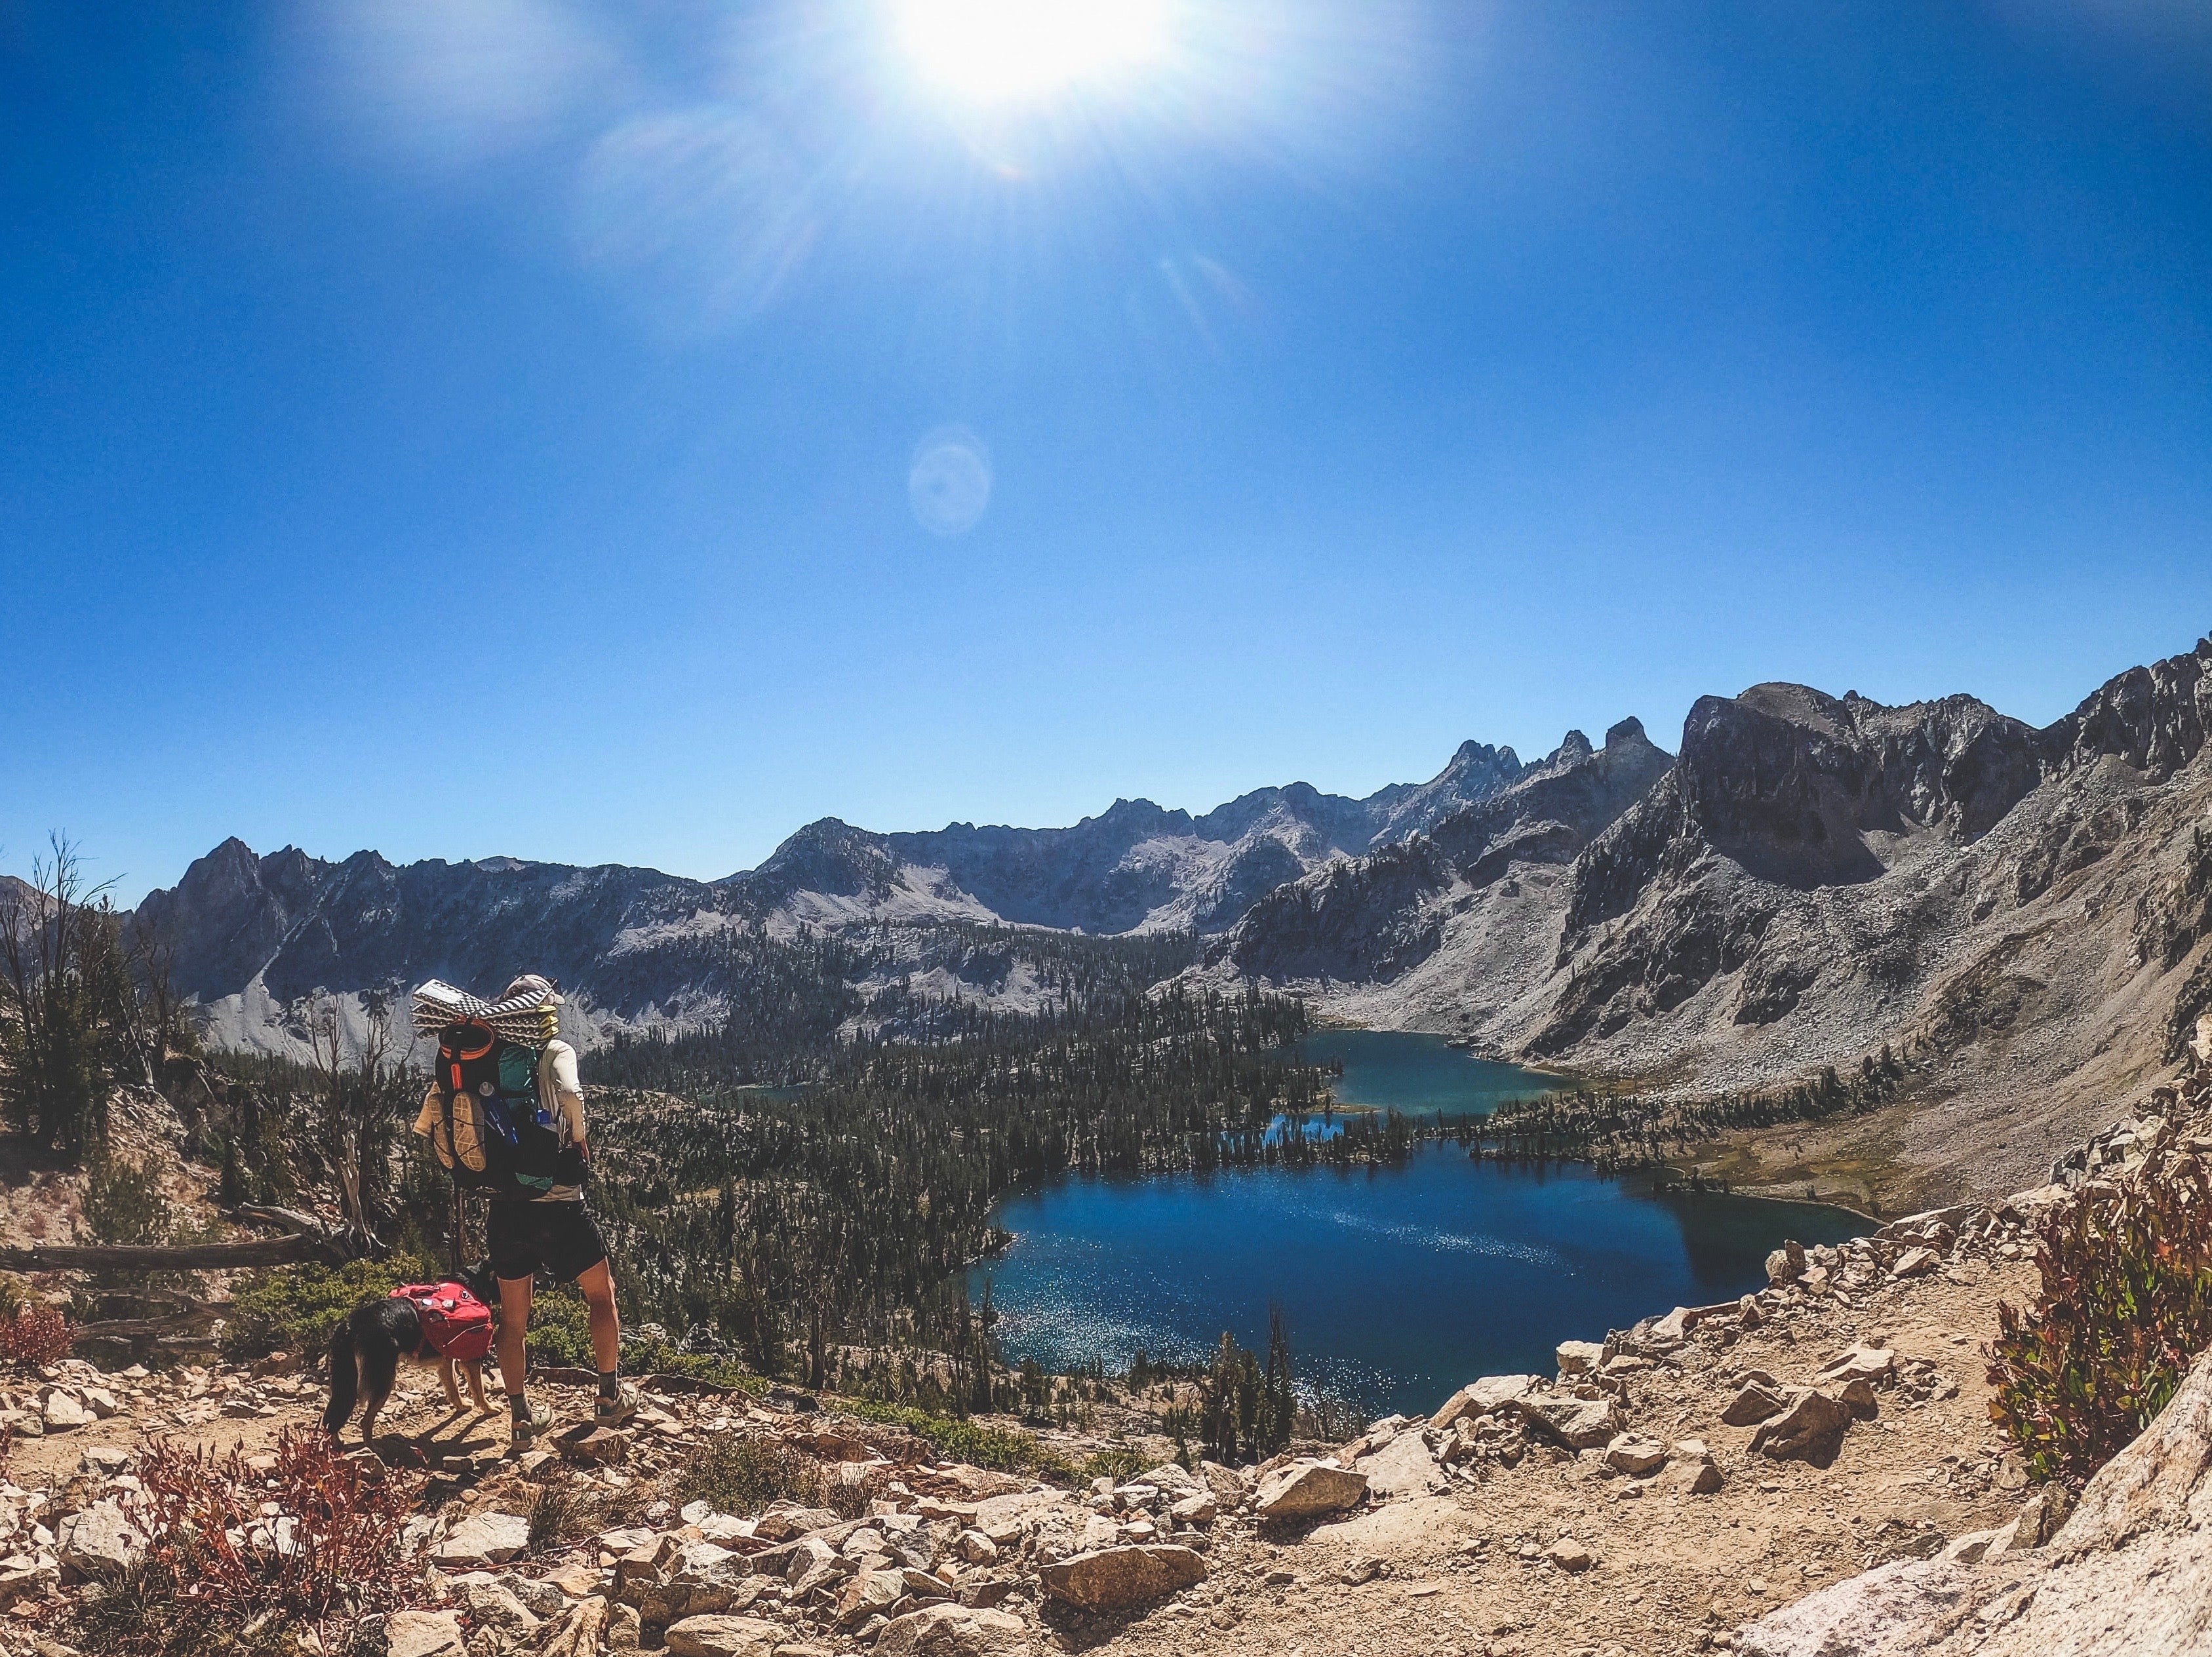 Human and dog overlooking a lake basin while backpacking